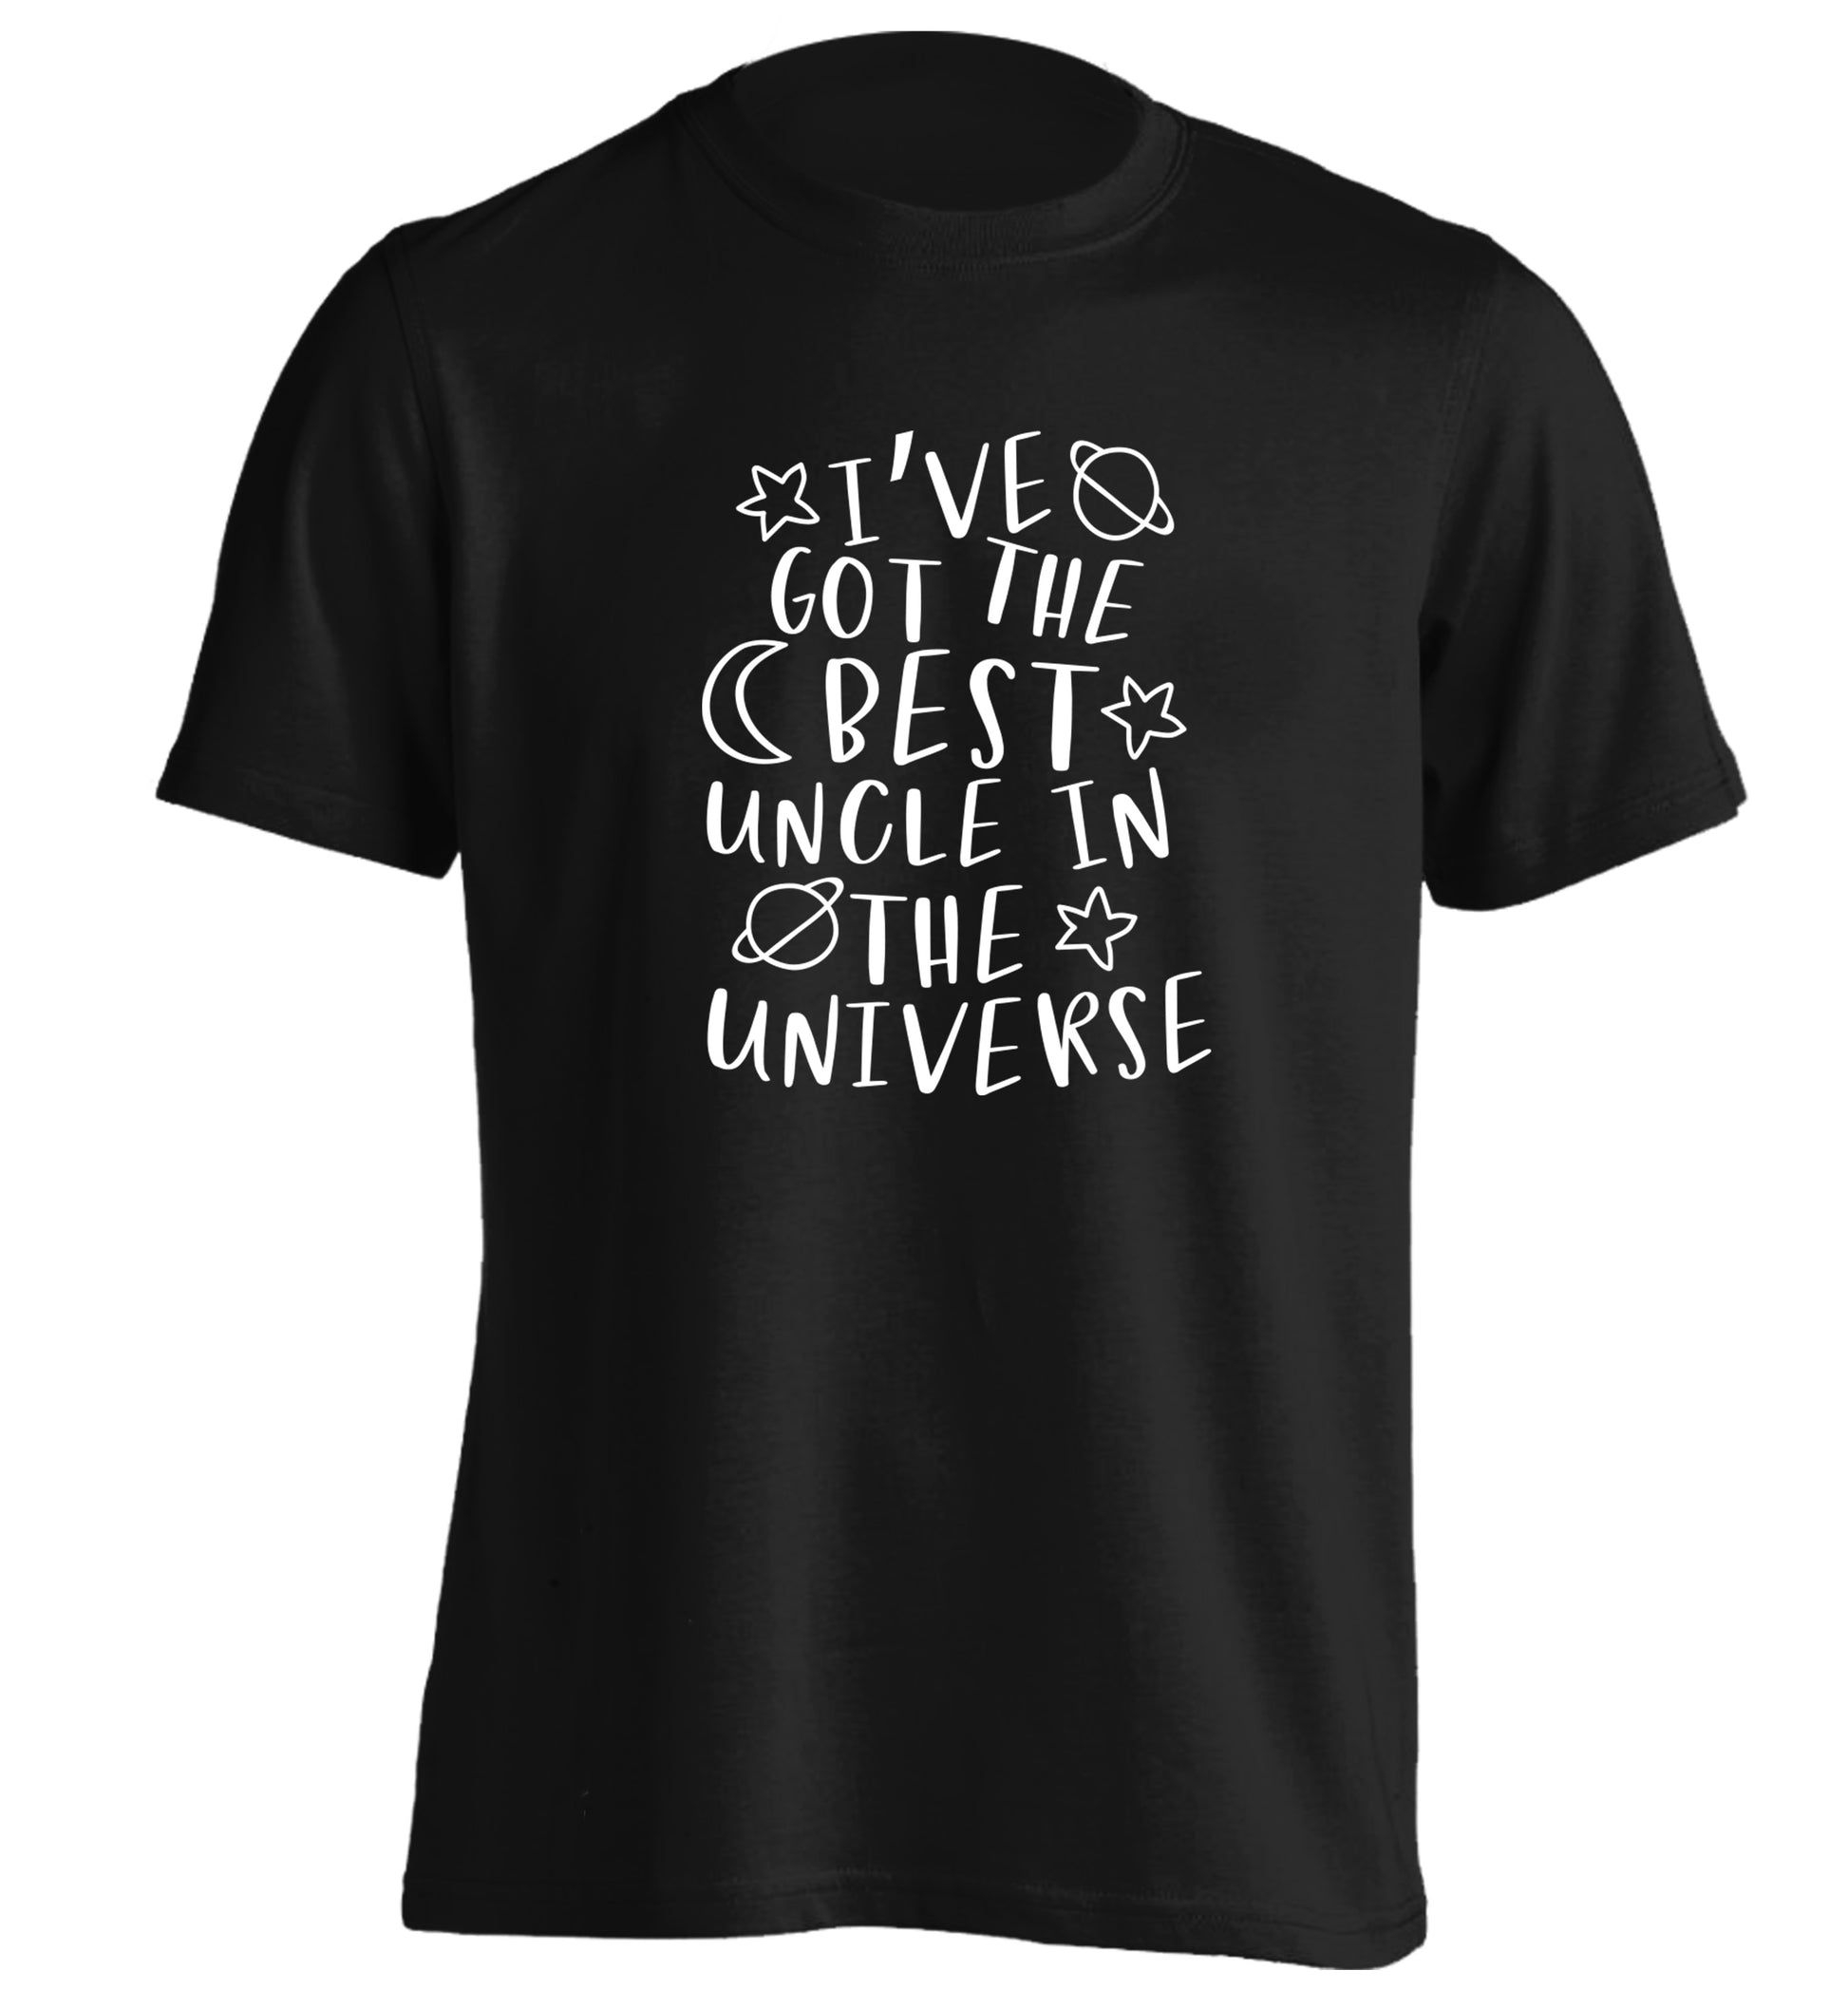 I've got the best uncle in the universe adults unisex black Tshirt 2XL